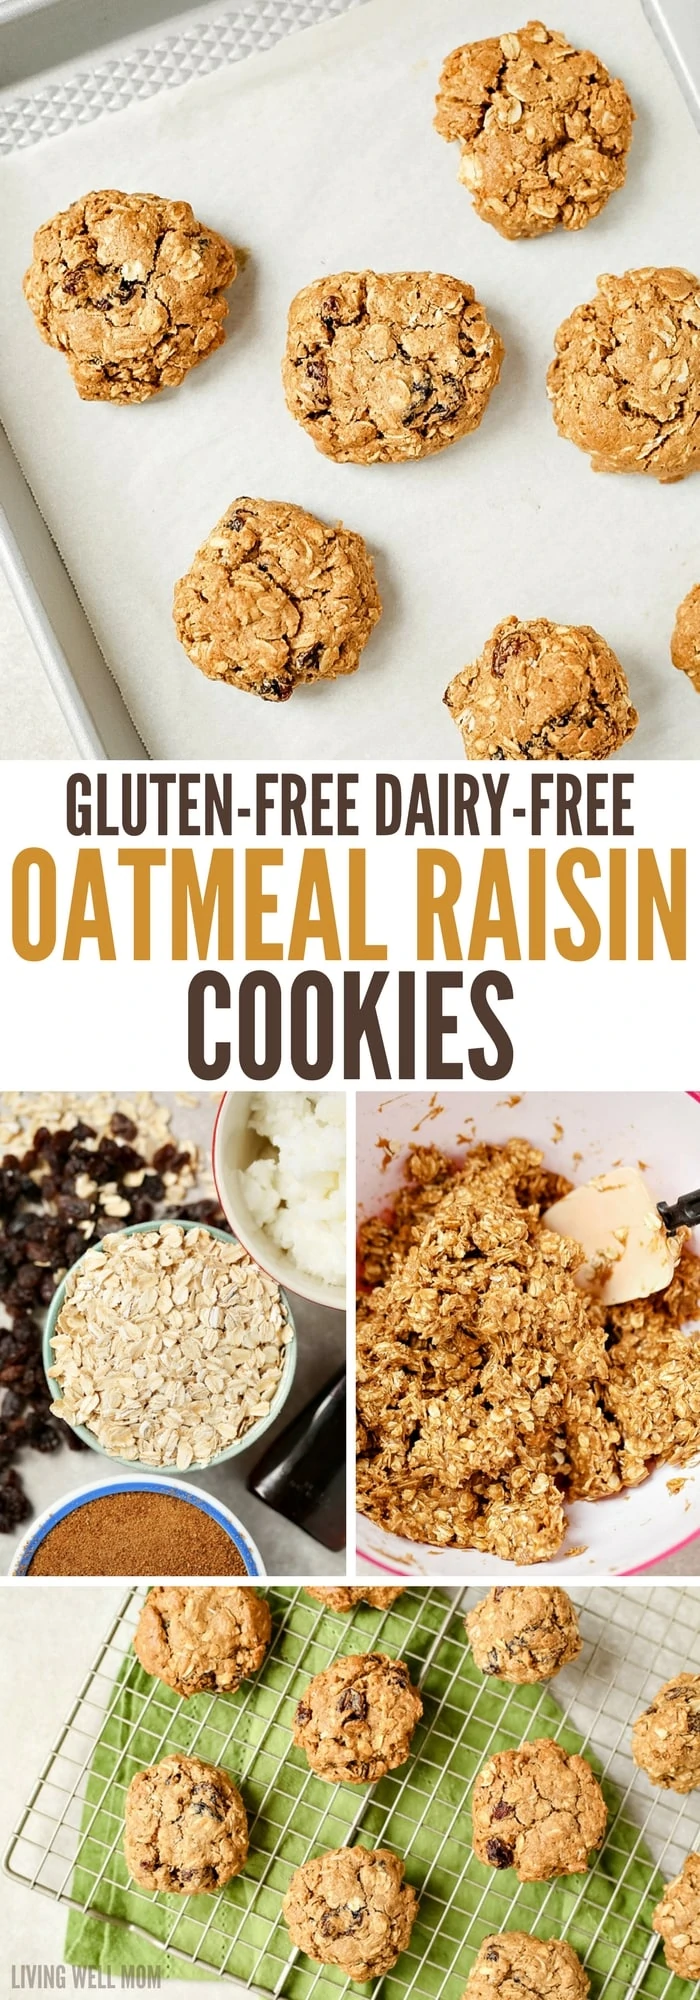 Gluten-free, dairy-free Oatmeal Raisin Cookies are so chewy, thick, and delicious, no one ever guesses they're not 'regular cookies! This kid-favorite recipe is deliciously spiced with cinnamon and a hint of nutmeg and chock full of raisins.